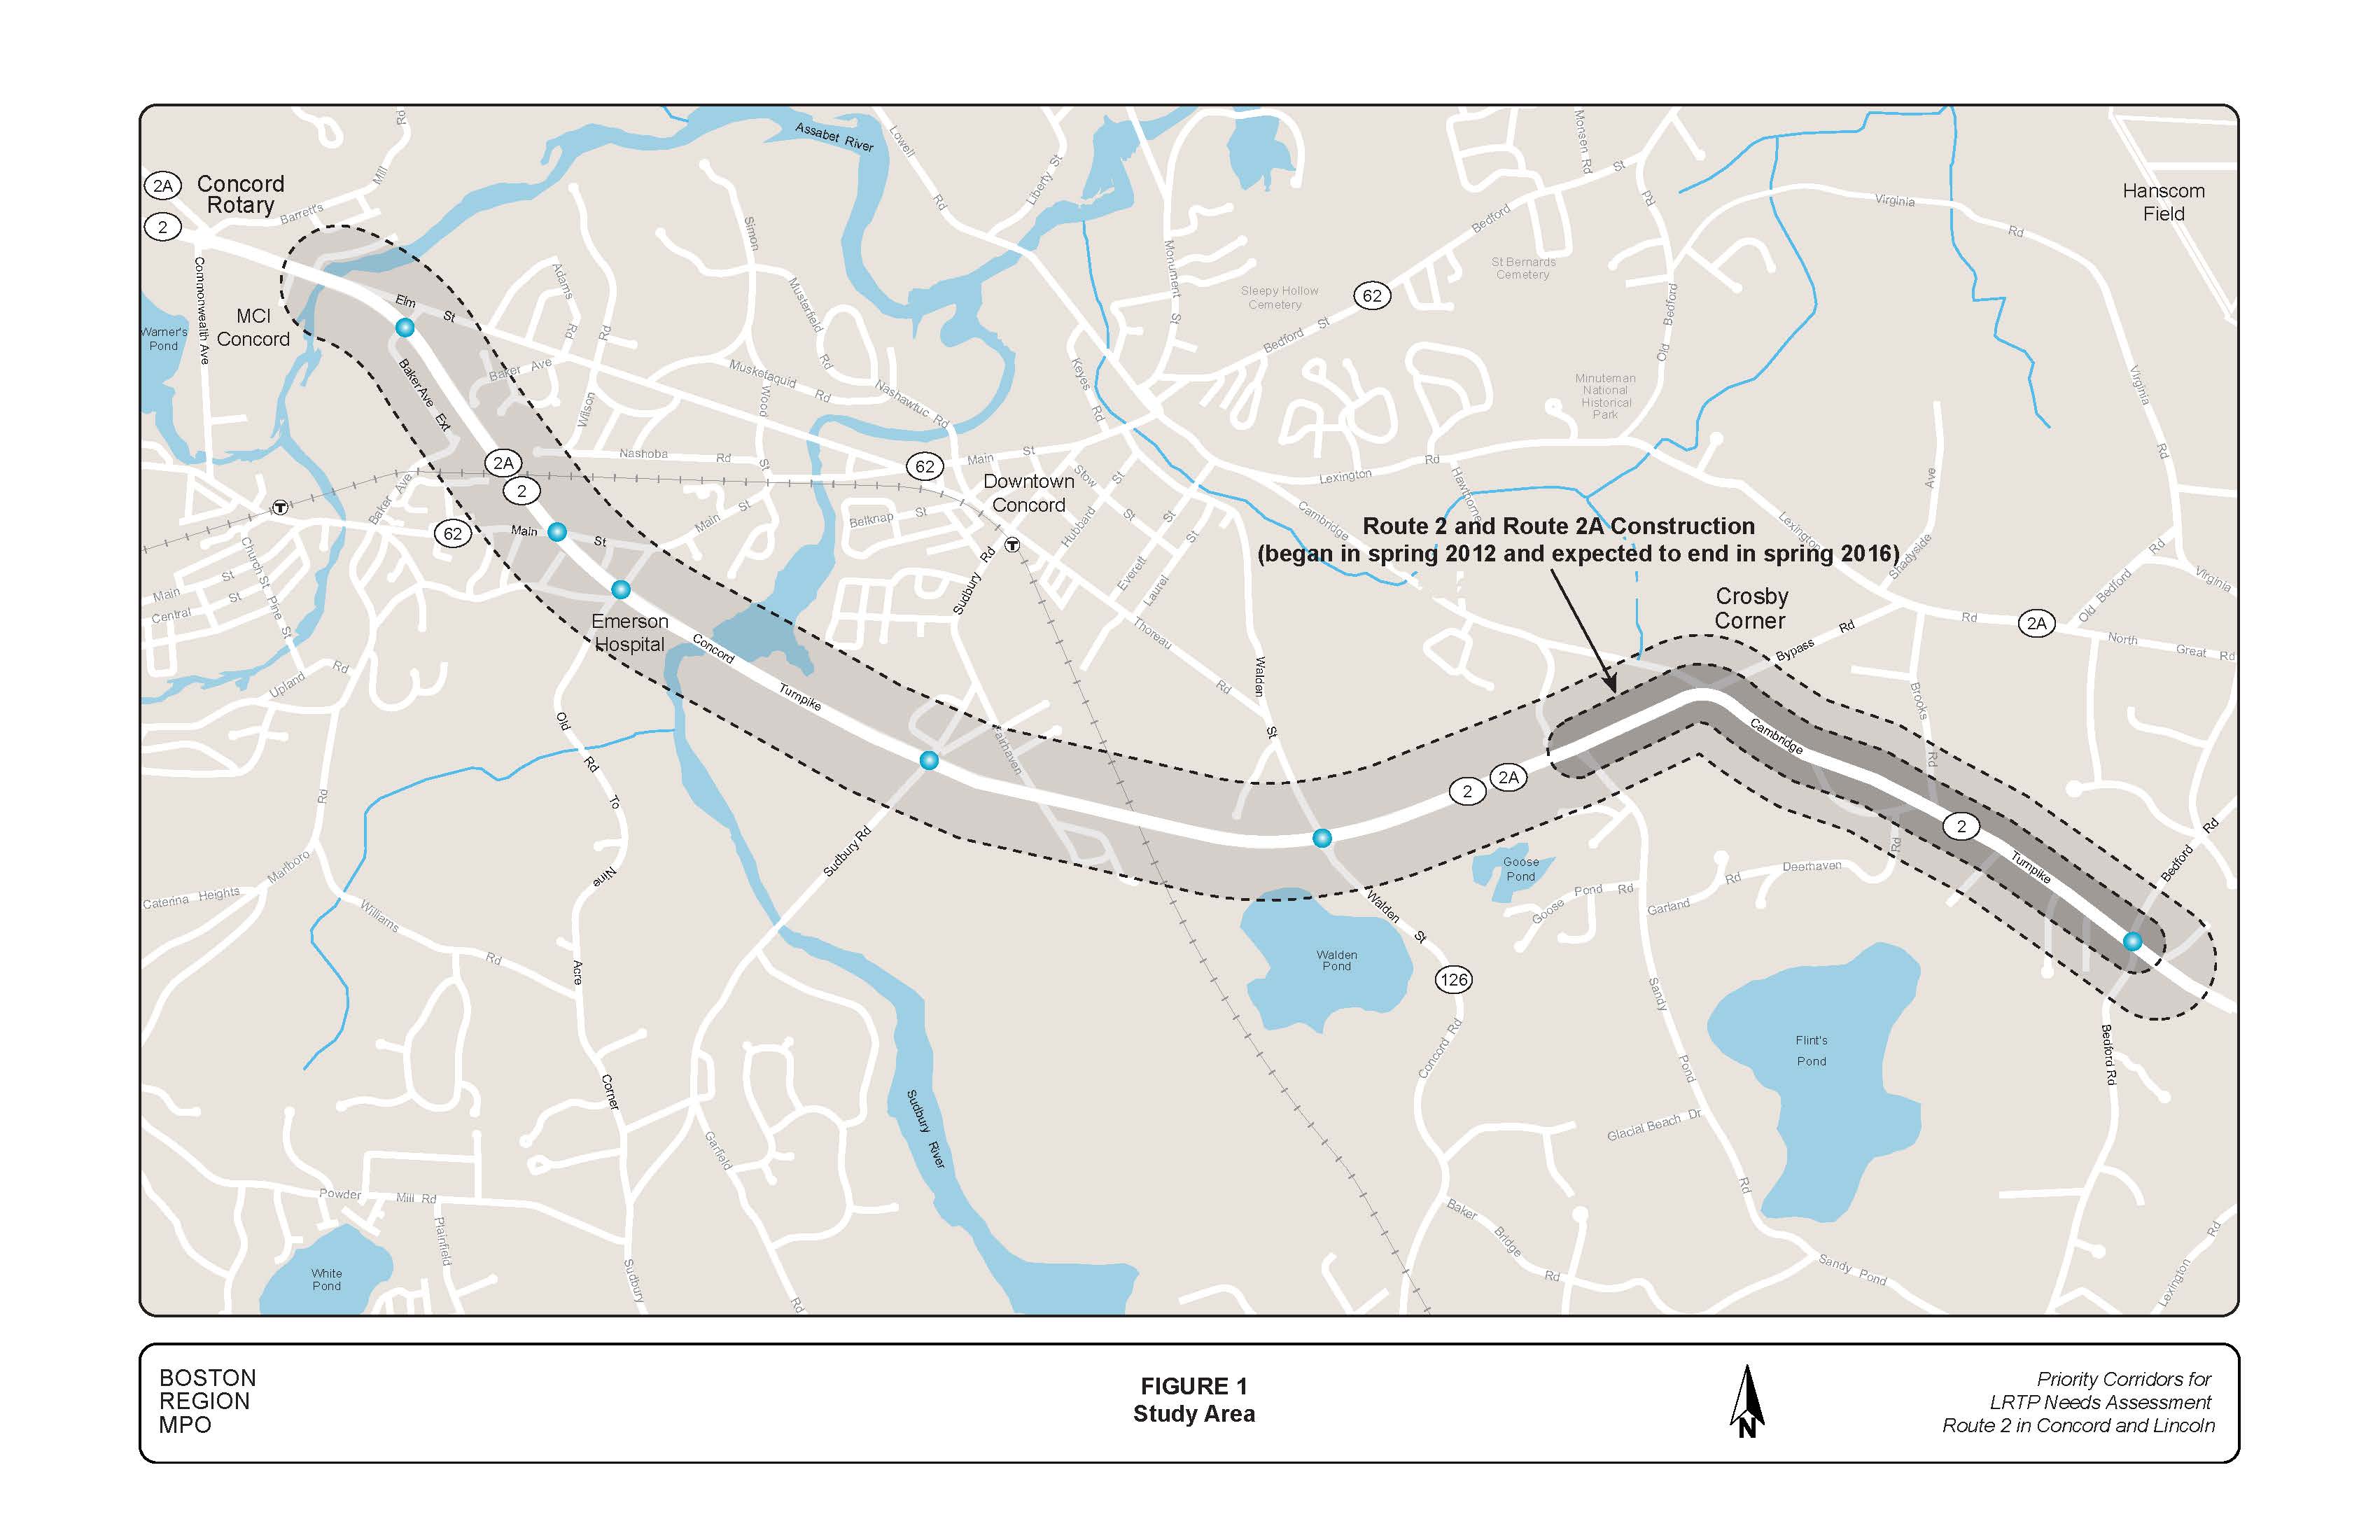 FIGURE 1 is a map that depicts the study 5.5-mile study area comprised of Route 2 from the Baker Avenue Extension in Concord to Bedford Road in Lincoln.